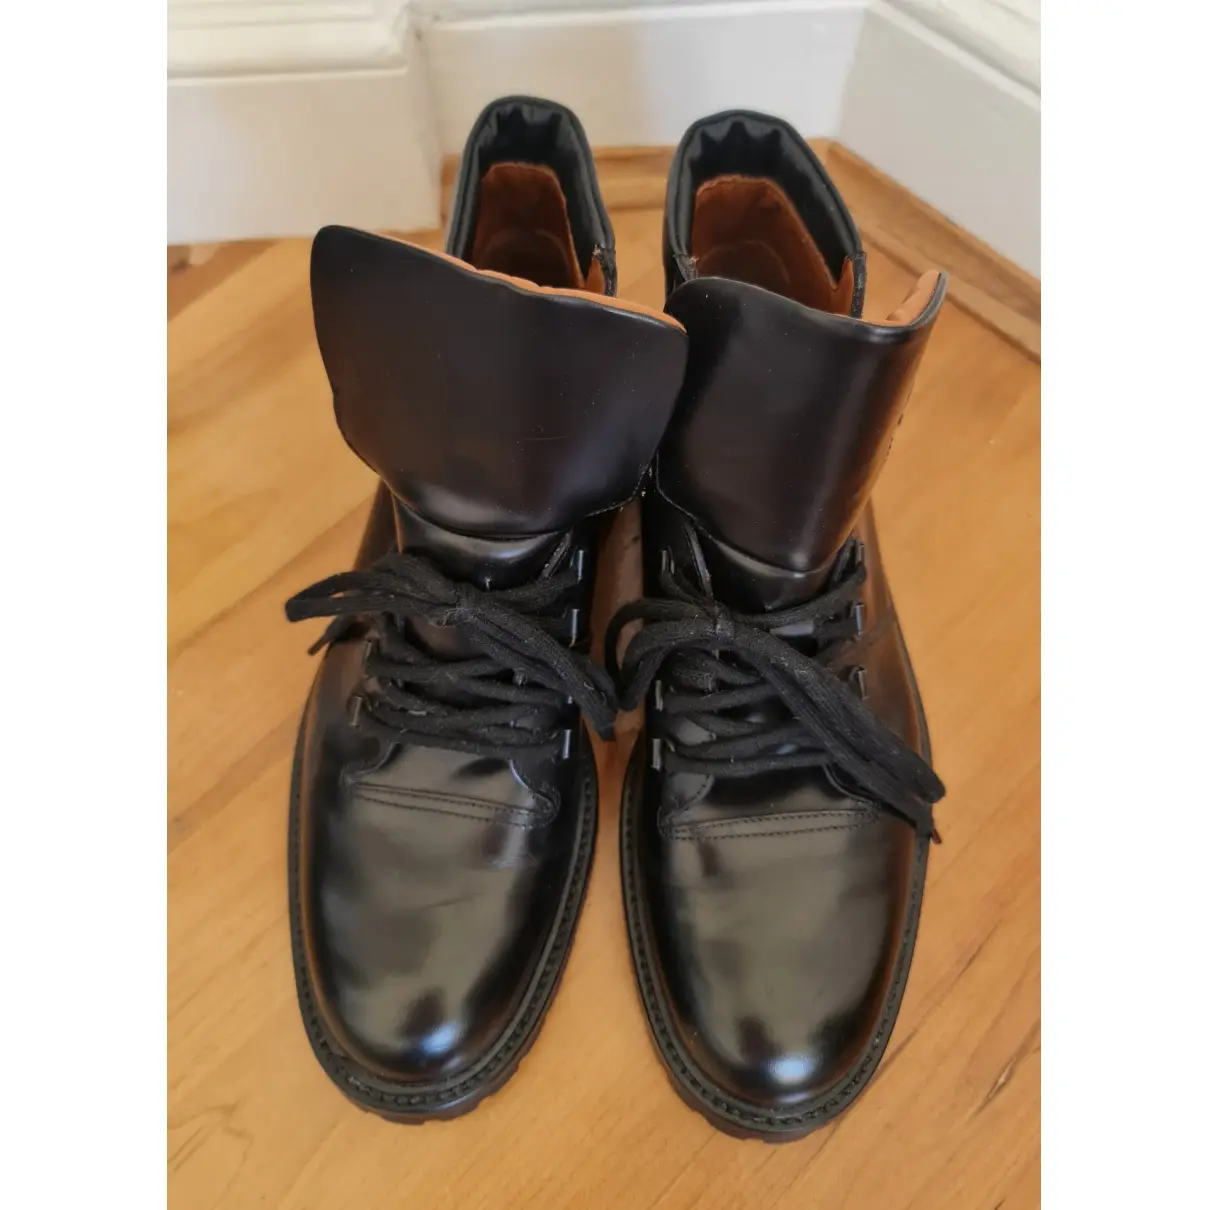 Buy Common Projects Leather ankle boots online